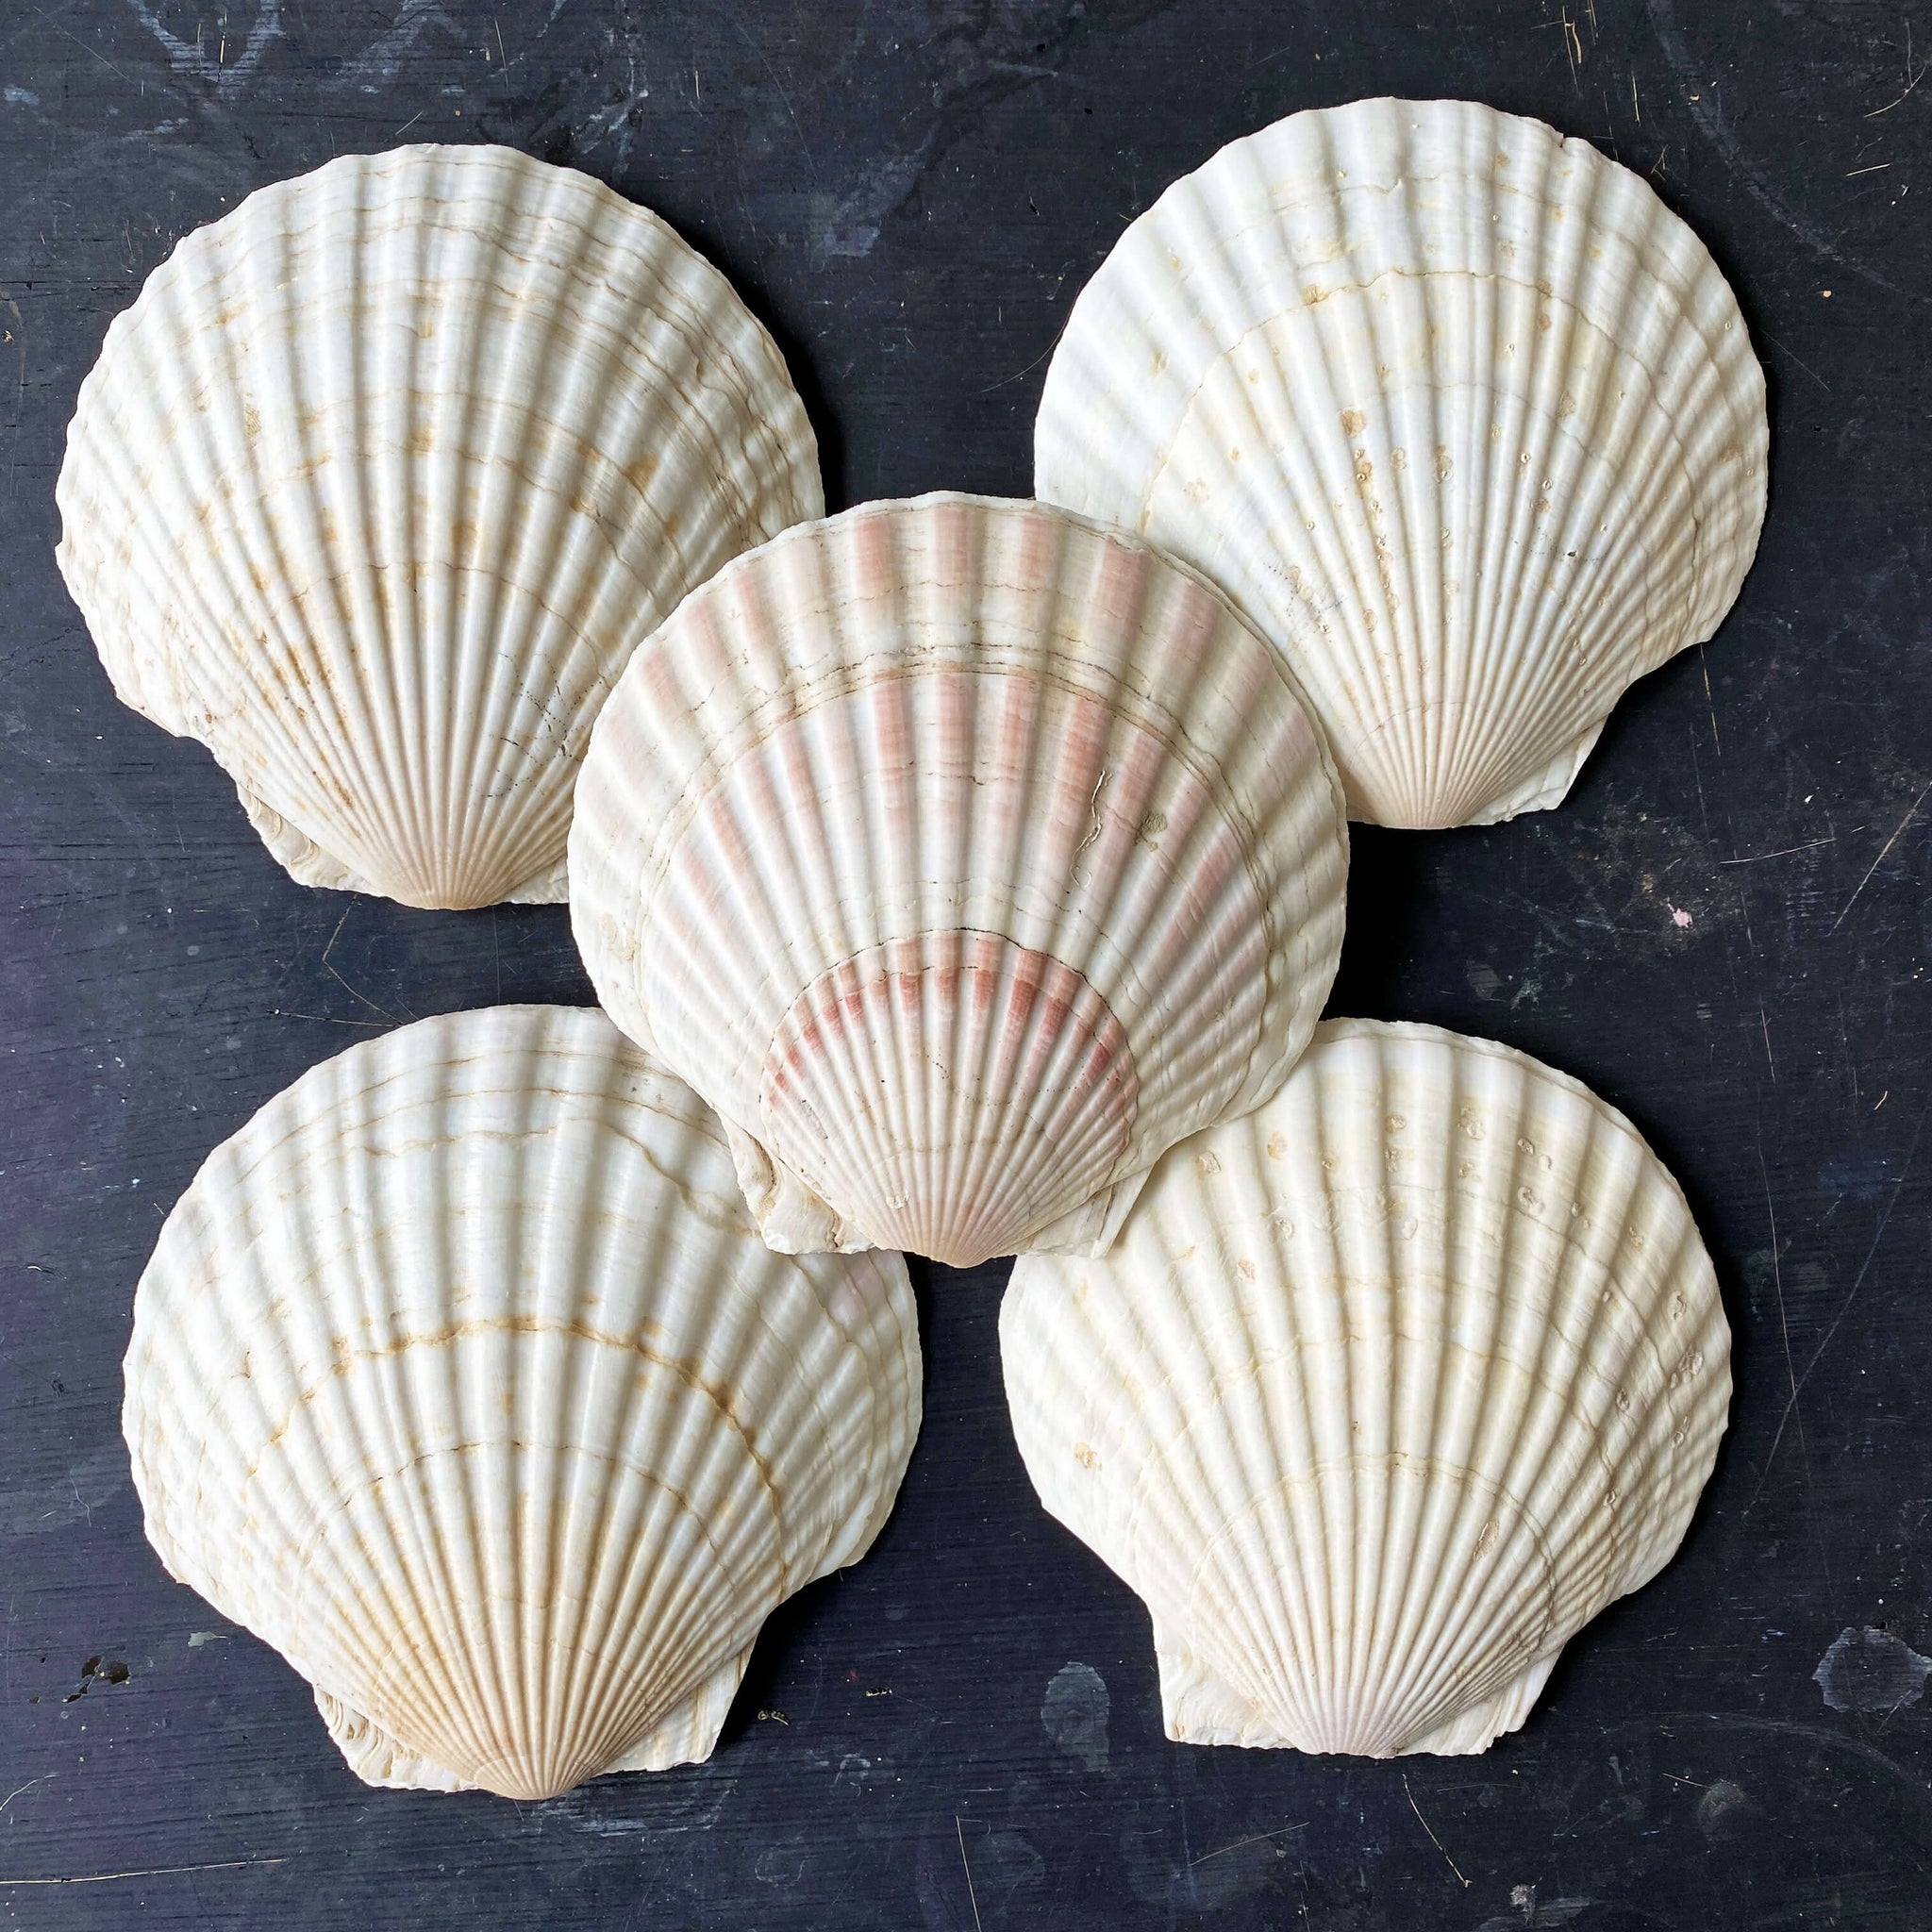 Vintage 1960s Sea Shell Appetizer Trays - Reese Finer Foods - Set of Seven Shells with Original Packaging